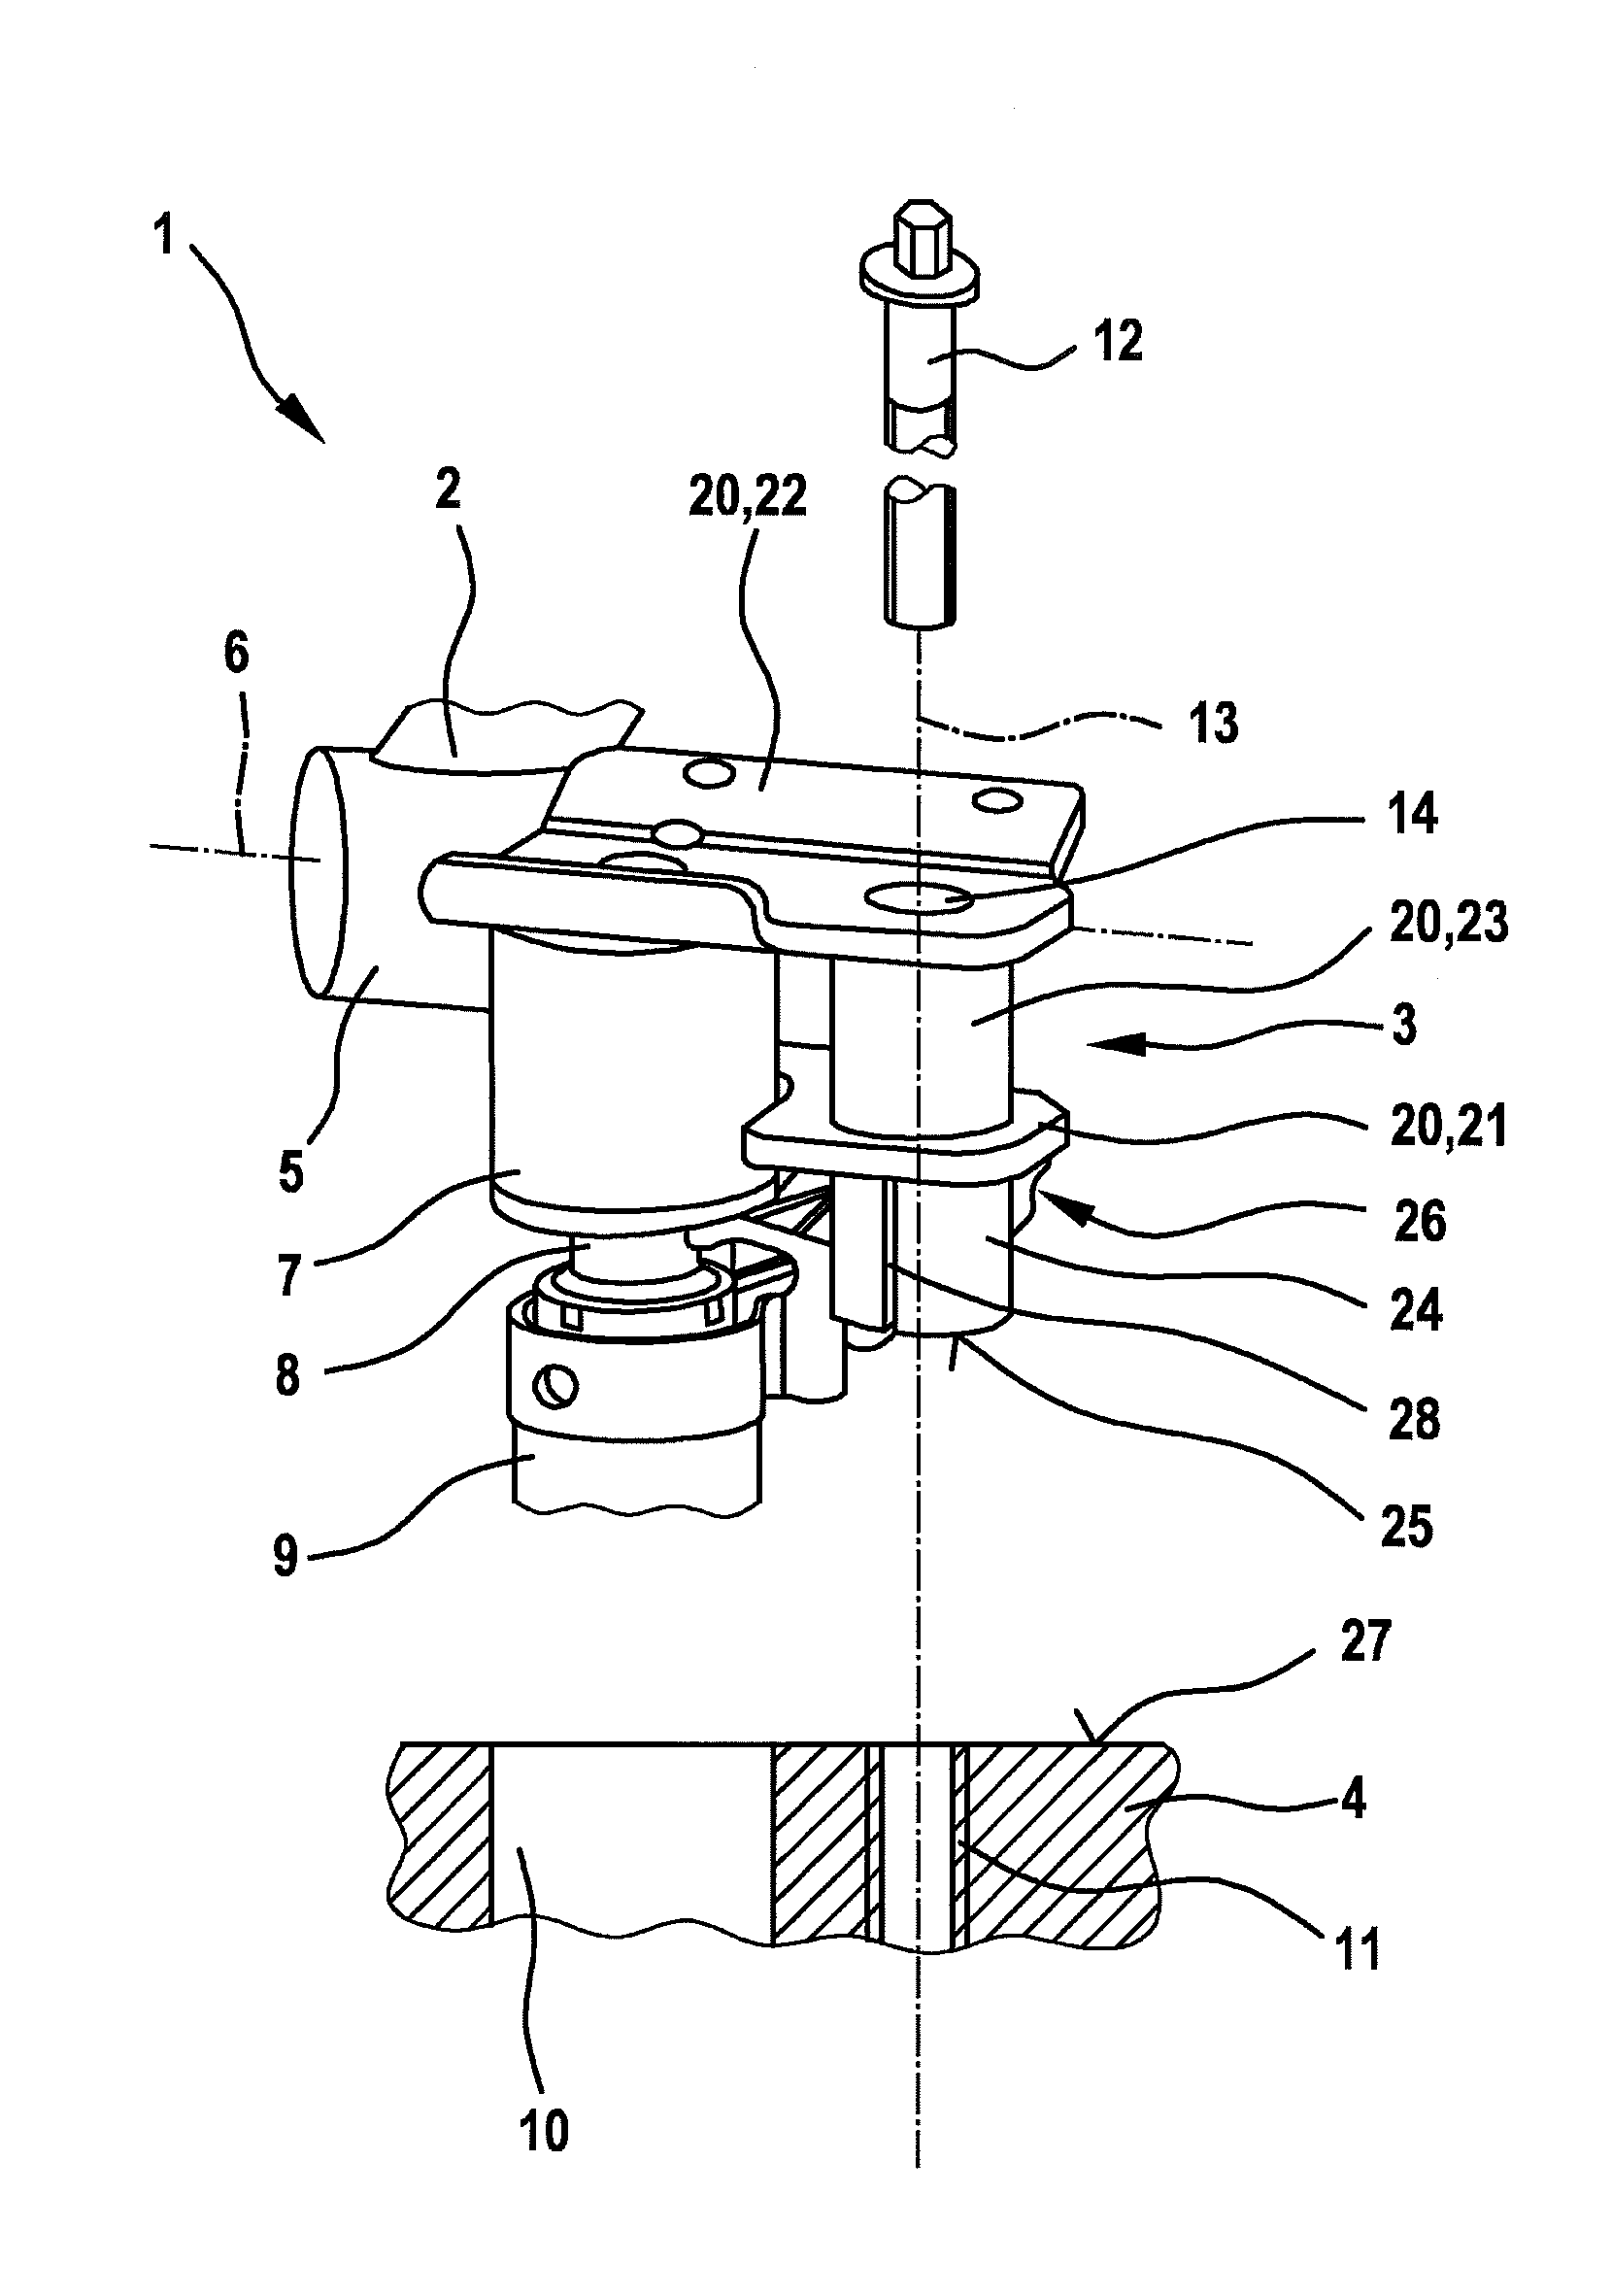 Holder and system having a fuel rail and multiple holders